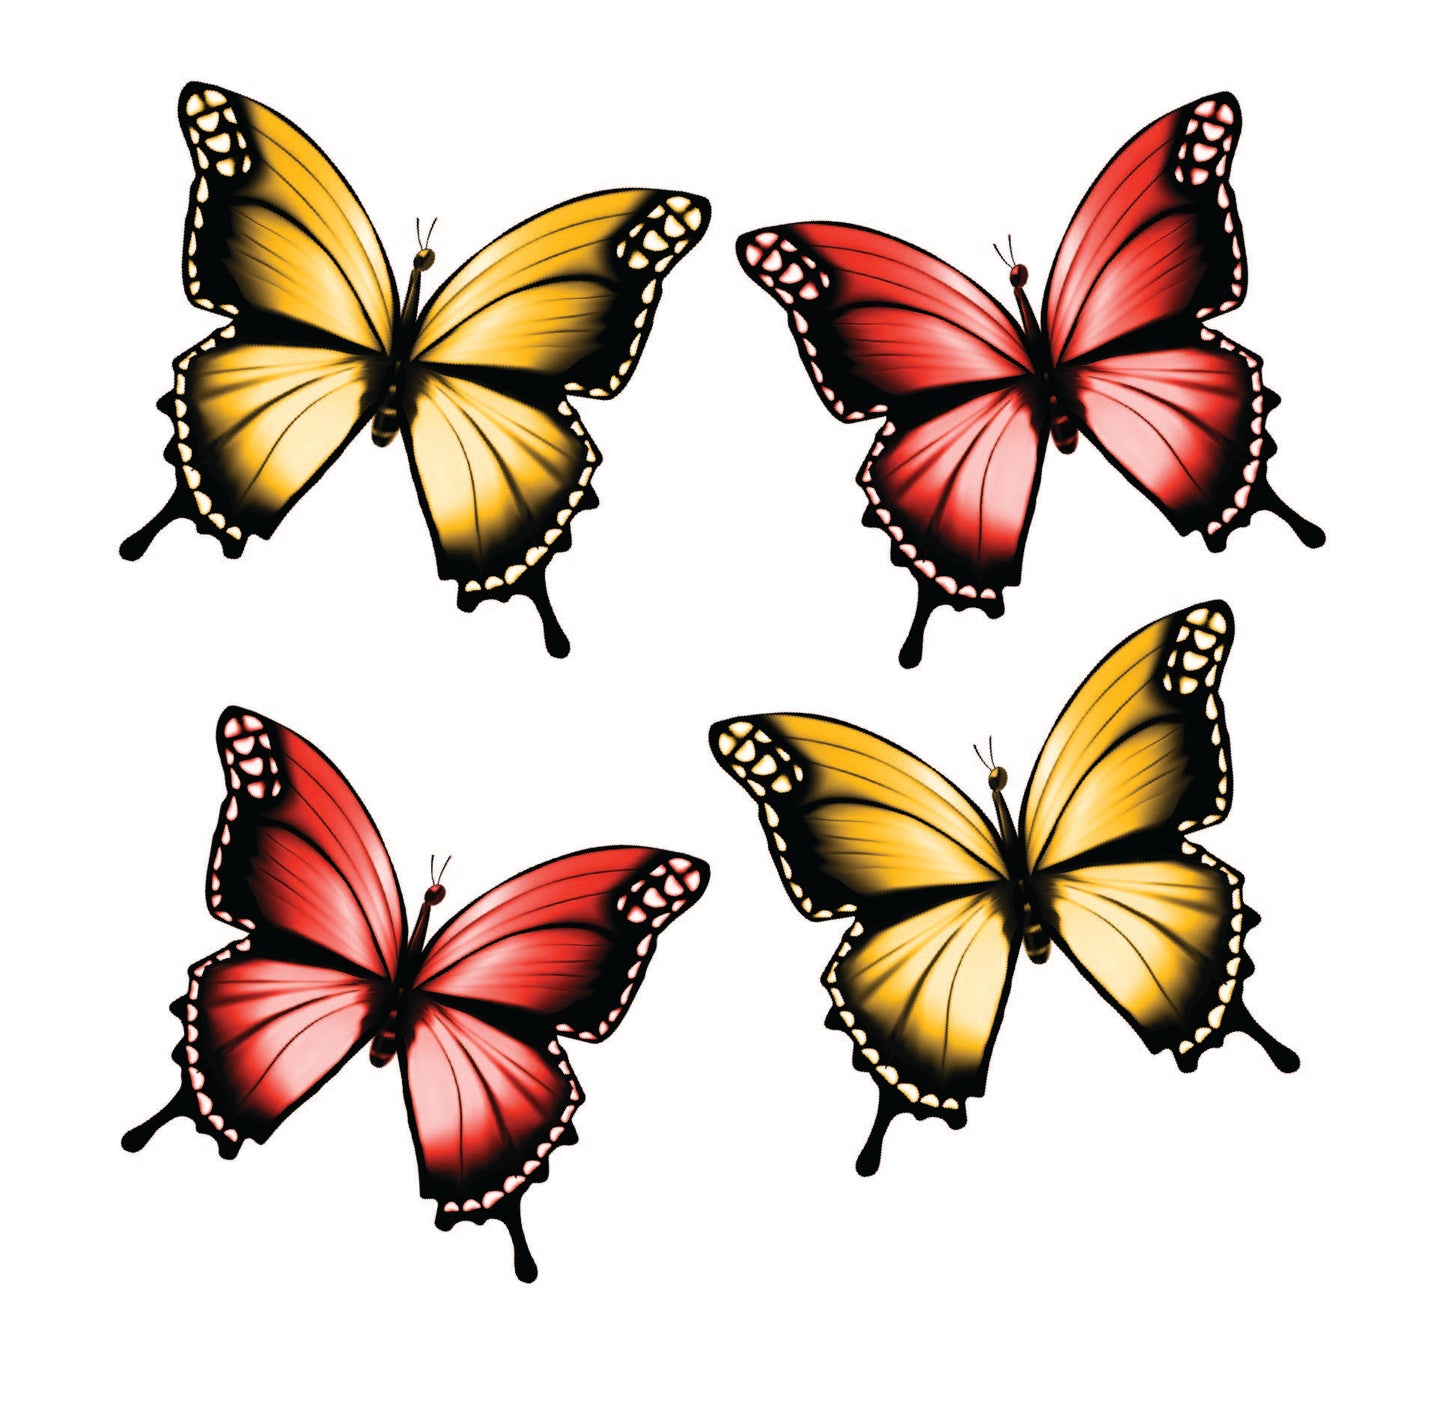 Butterflies Red and Yellow Half Sheet Misc. (Must Purchase 2 Half sheets - You Can Mix & Match)